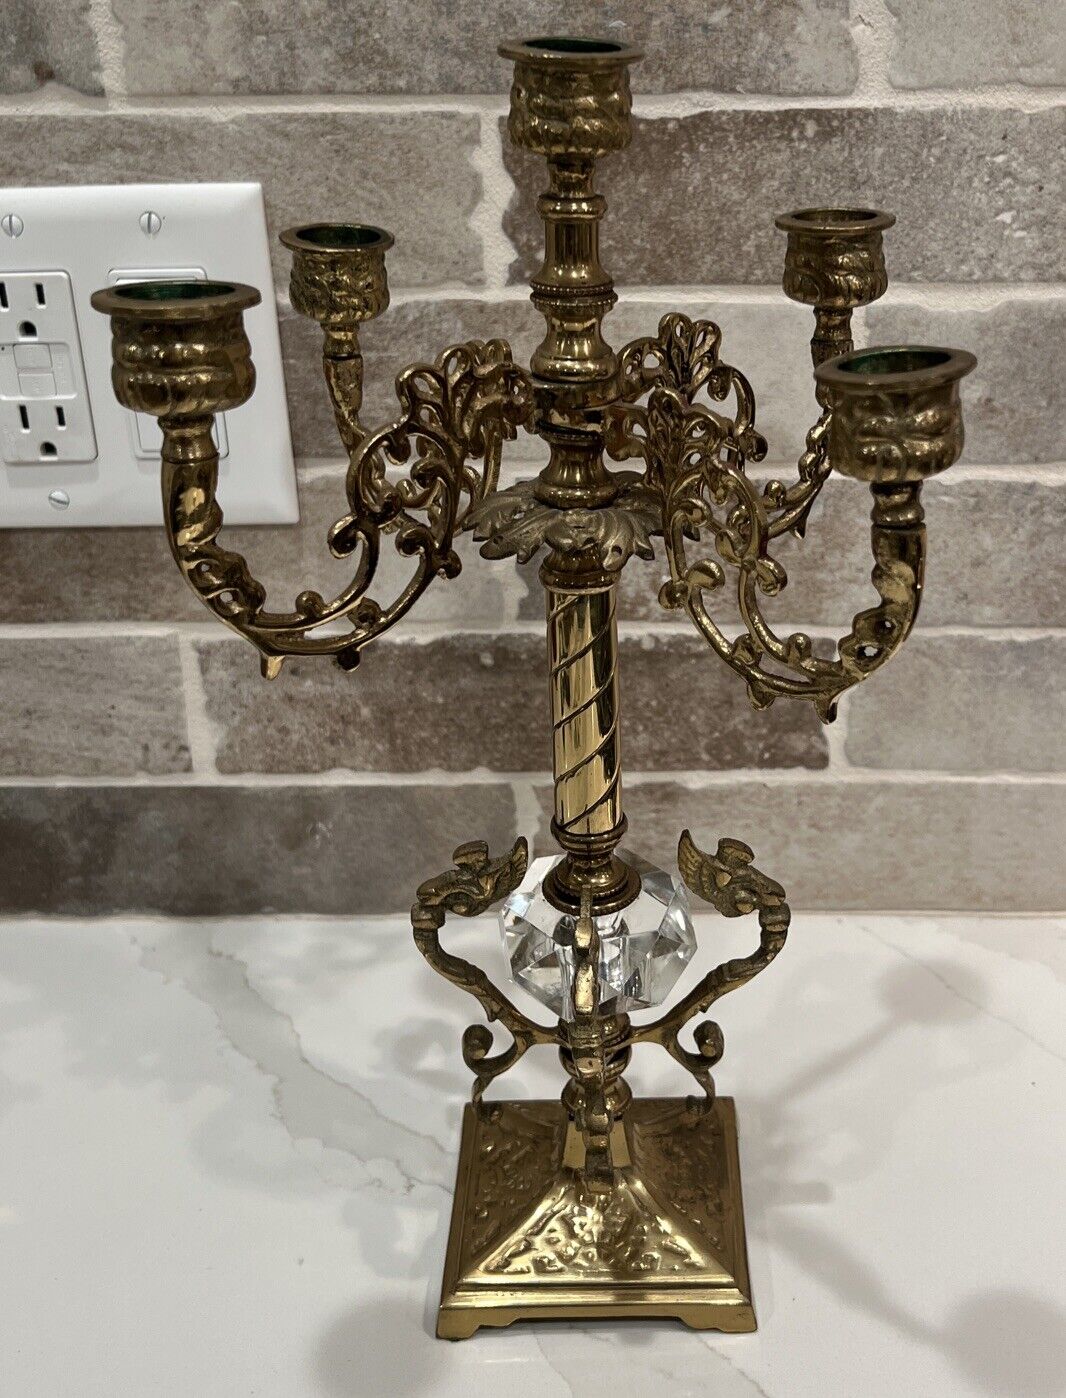 Vintage Brass 4 Arm Candleabra with Ornate Design Detail 13 3/4” H